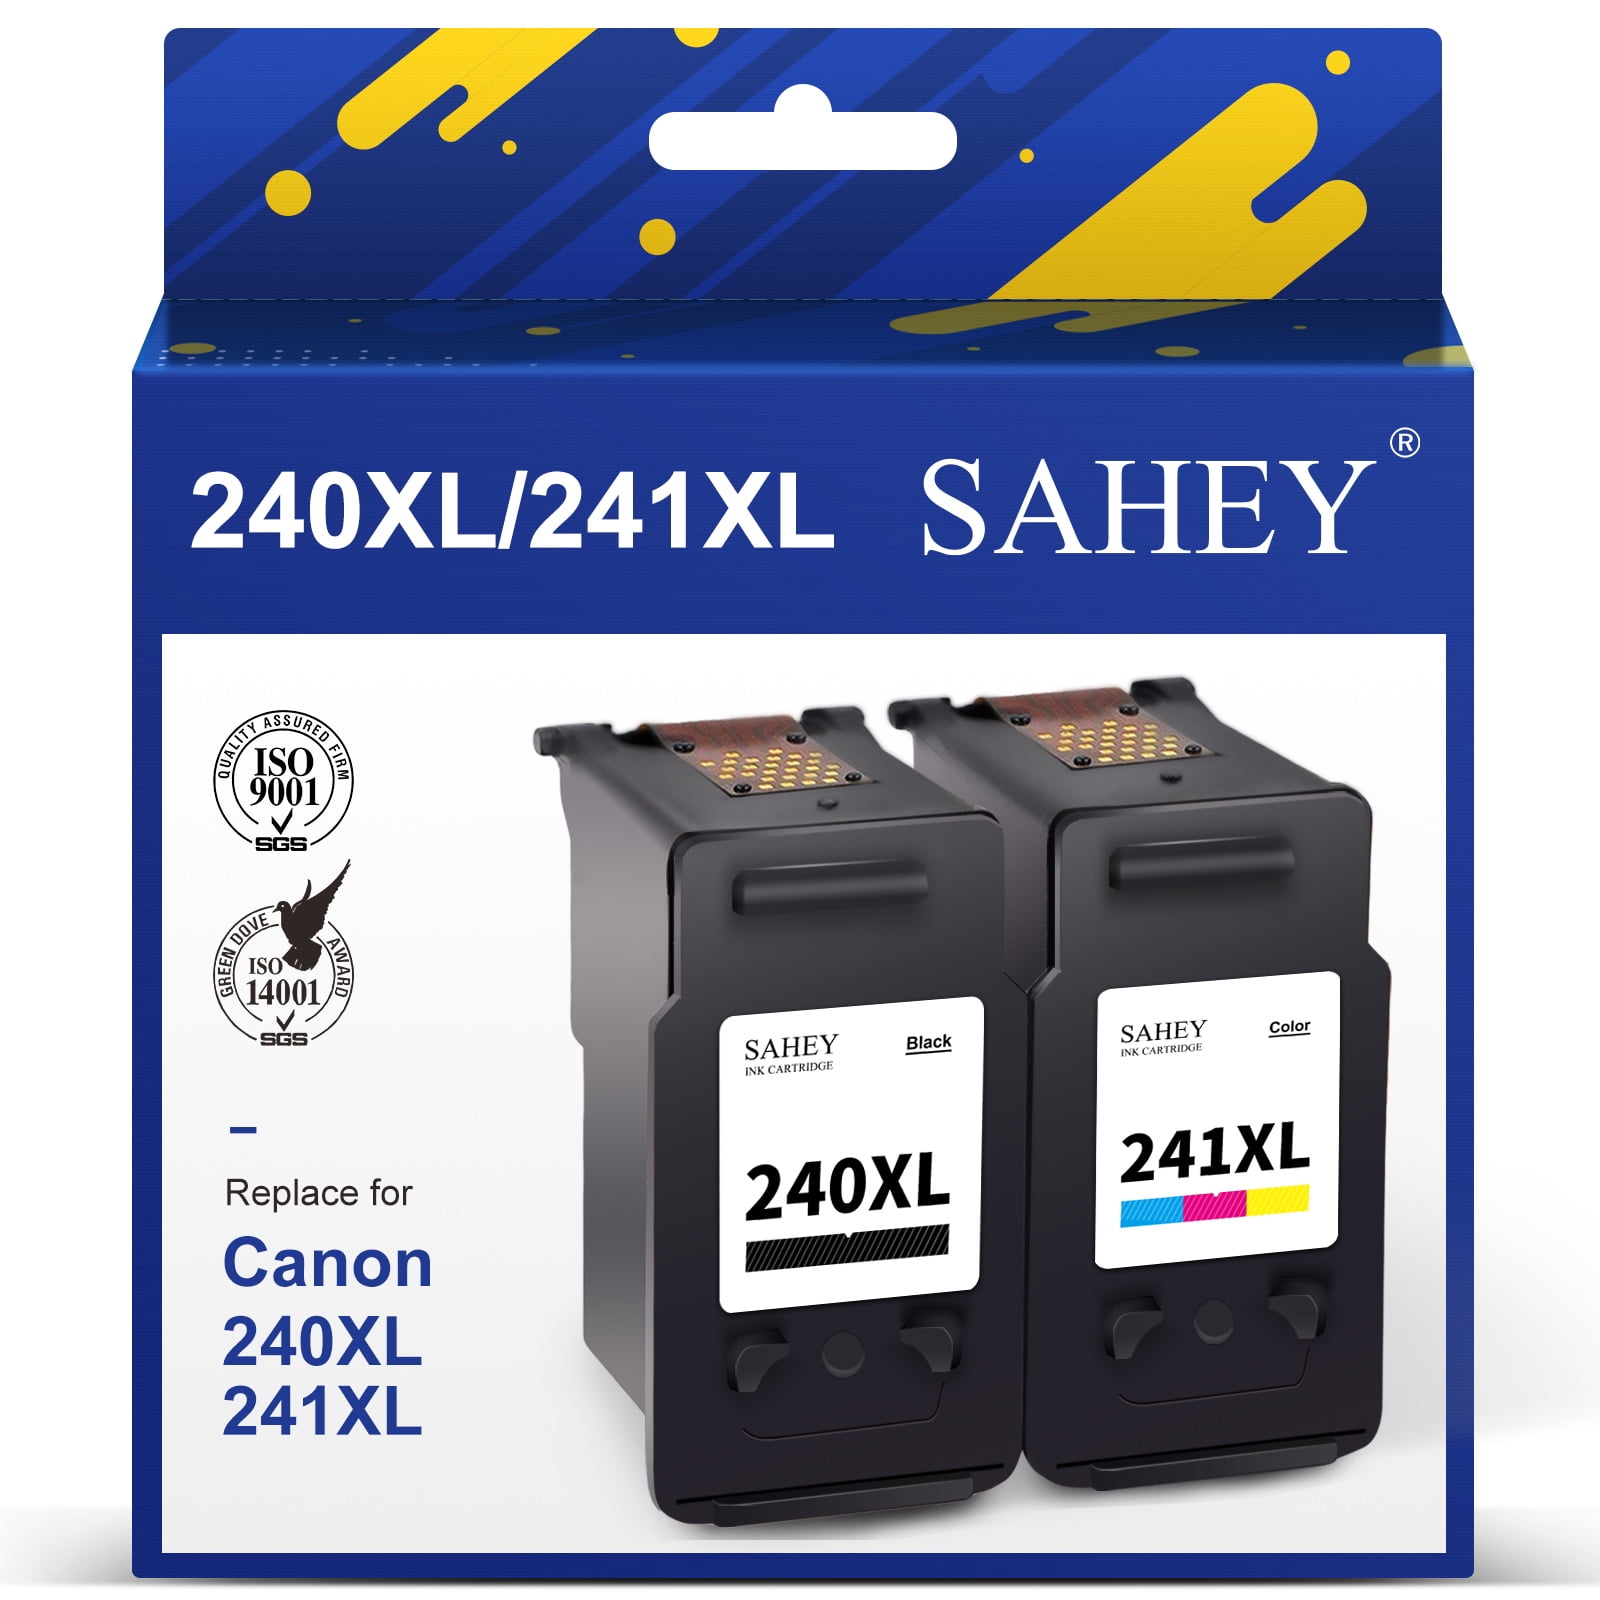 entanglement Uventet Touhou 240XL 241XL Ink Cartridges for Canon Printer ink 240 and 241 for Canon 240  XL and 241 XL for Canon Pixma MG3620 TS5120 MG2120 MG3520 MX452 MX512 MX532  MX472 Printers (1 Black, 1 Tri-Color) - Walmart.com